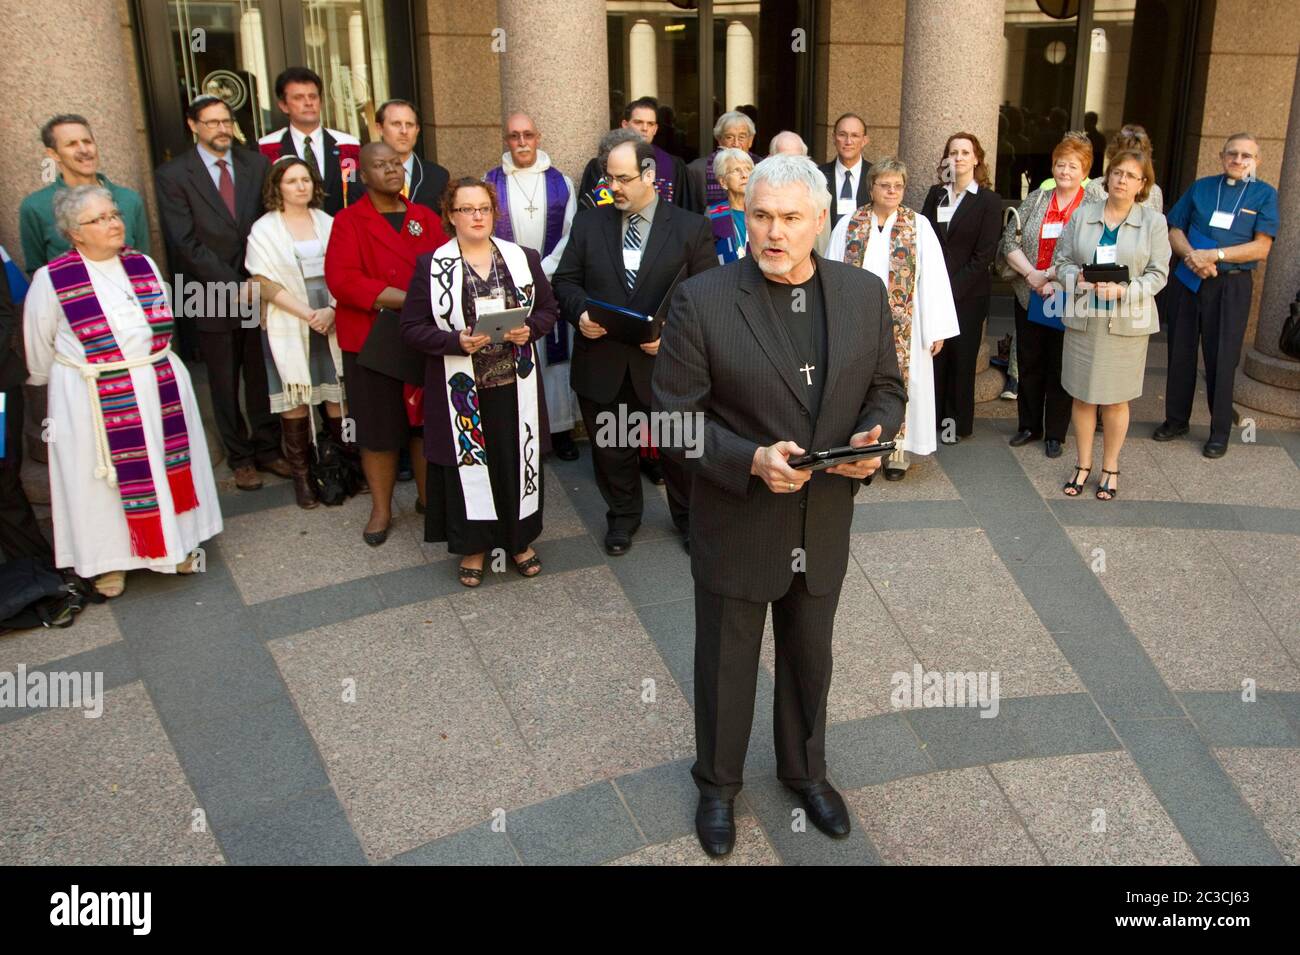 Austin, Texas USA, February 2013: White male minister, backed by other clergy members, urges Texas legislators to restore funding for family planning and birth-control services for low-income women during a press conference at the Texas Capitol. Texas Faith in Action and the Texas Freedom Network are nonpartisan, grassroots organization of religious and community leaders. ©MKC/Bob Daemmrich Photography, Inc. Stock Photo